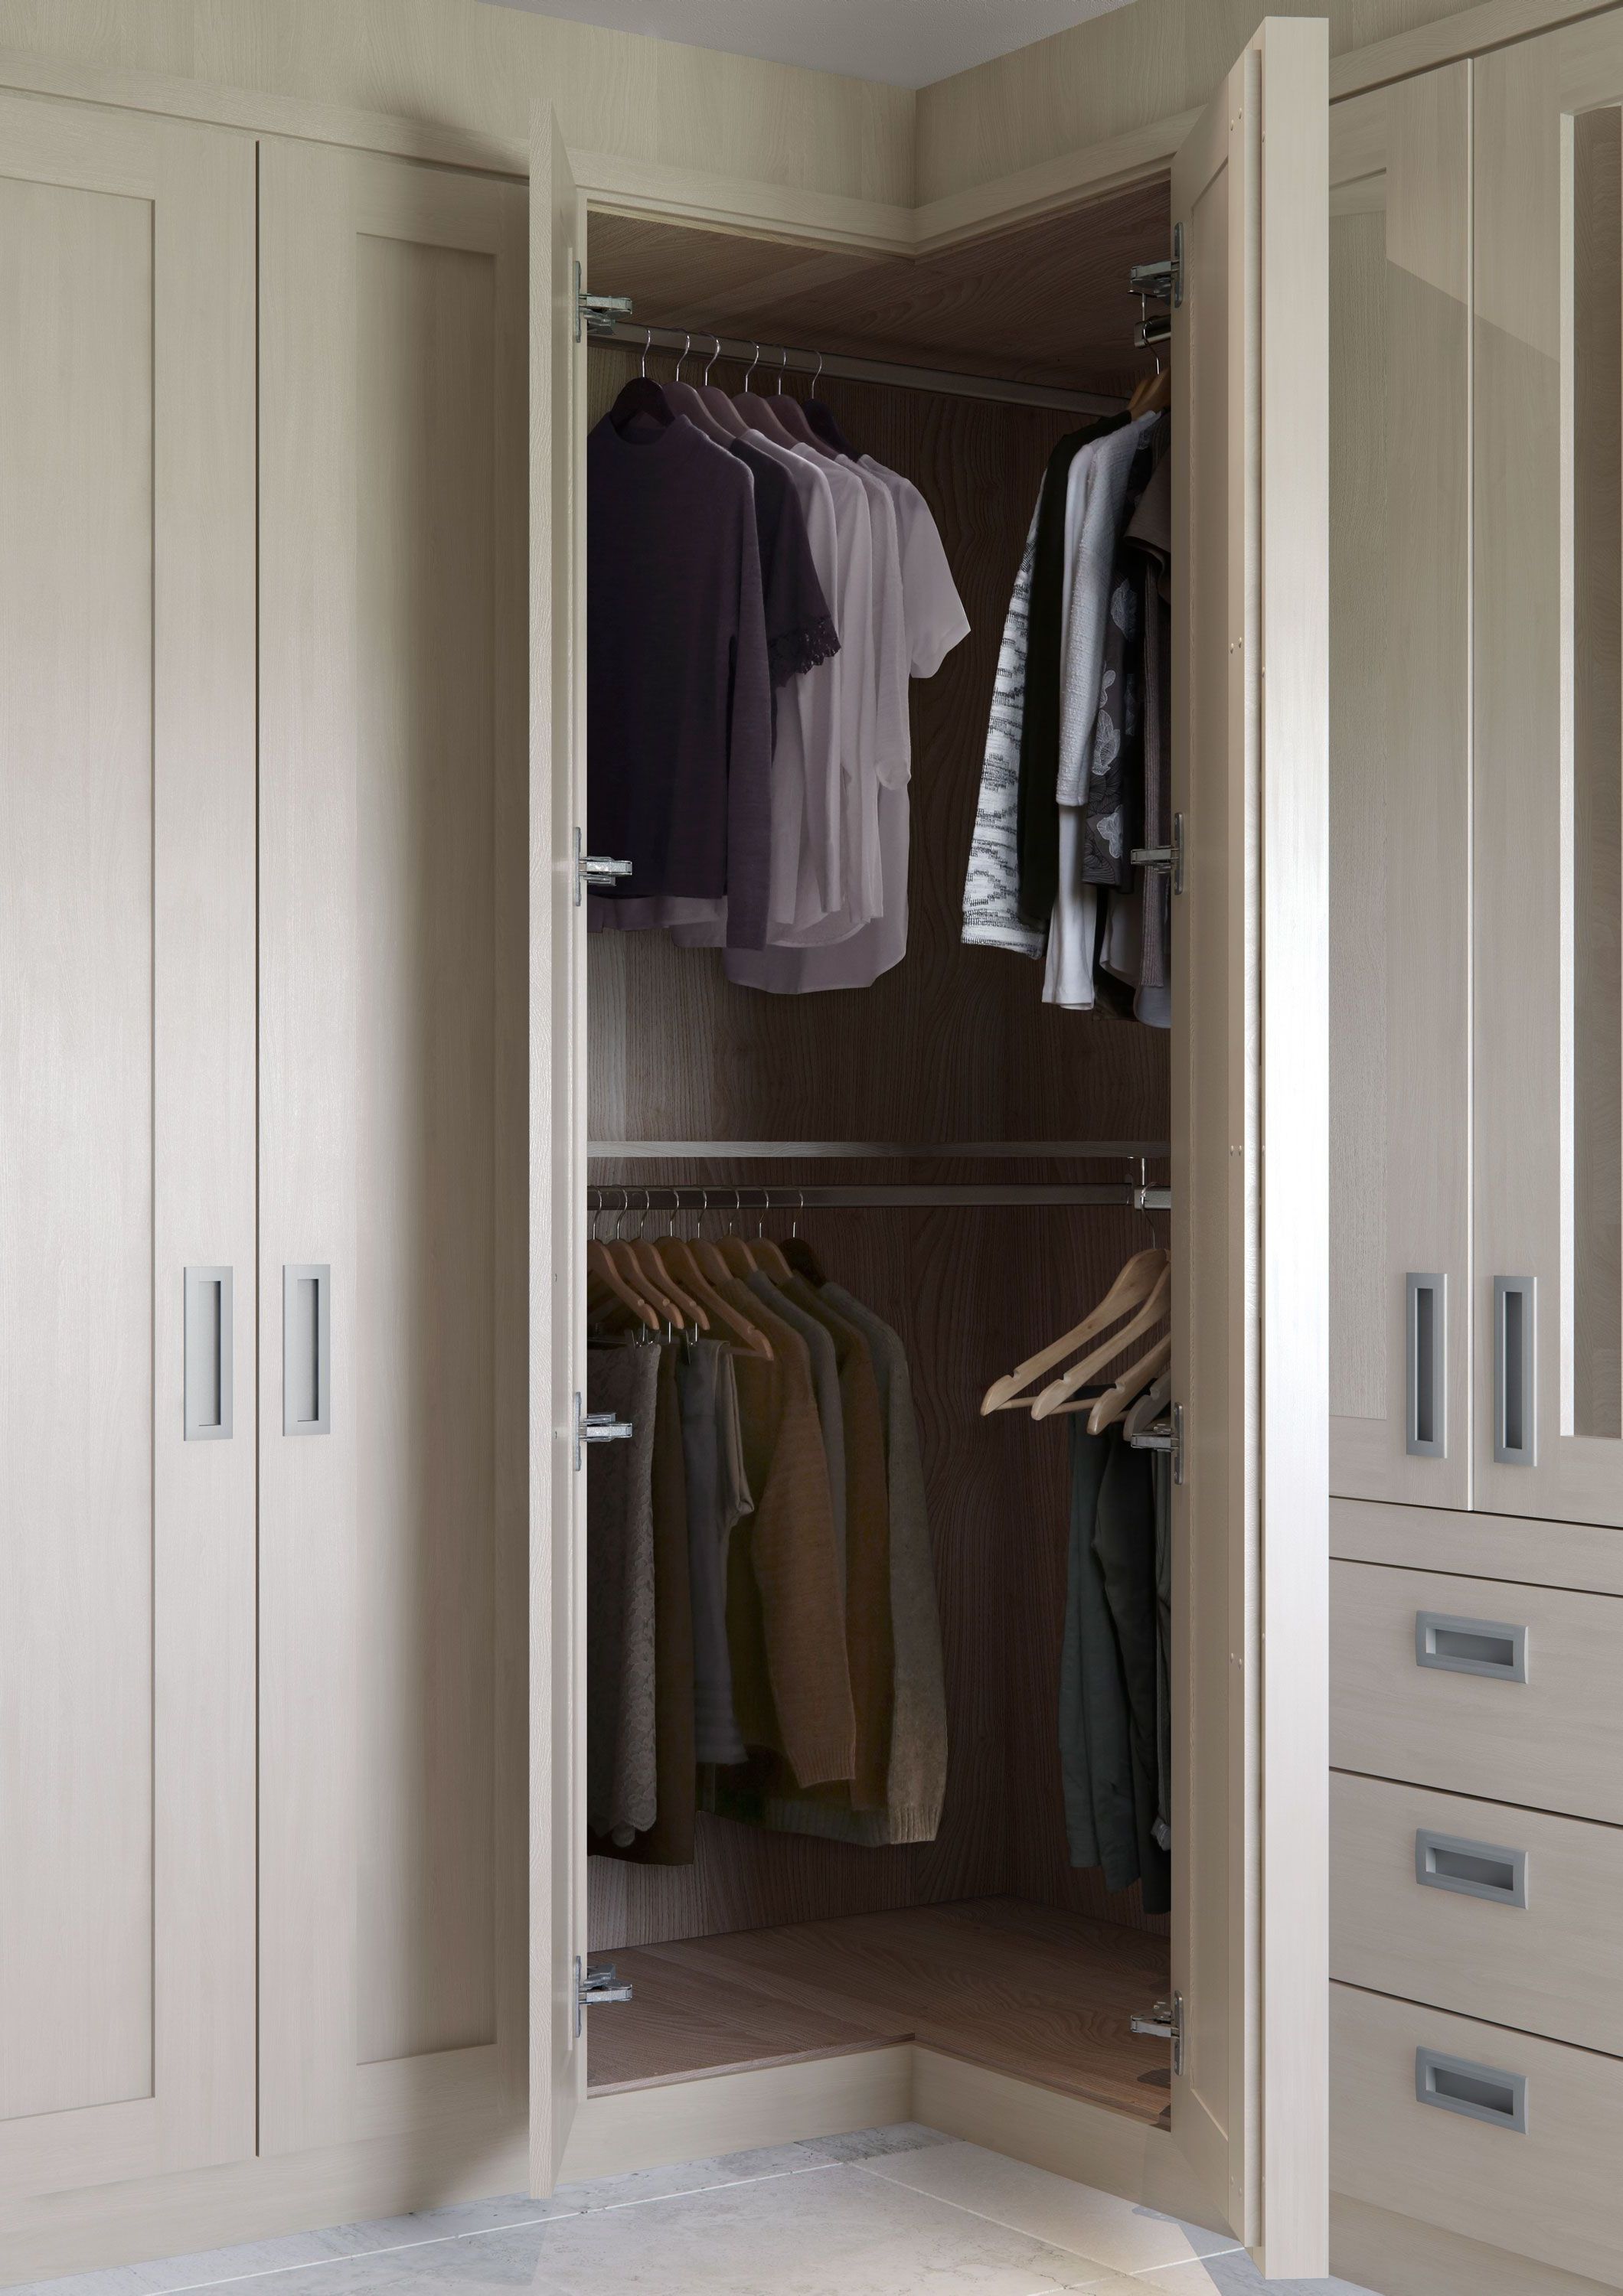 Make The Most Of The Corner Space With This Angled Double Hanging Rail. |  Corner Wardrobe, Corner Wardrobe Closet, Bedroom Built In Wardrobe Regarding Double Rail Wardrobes (Gallery 8 of 20)